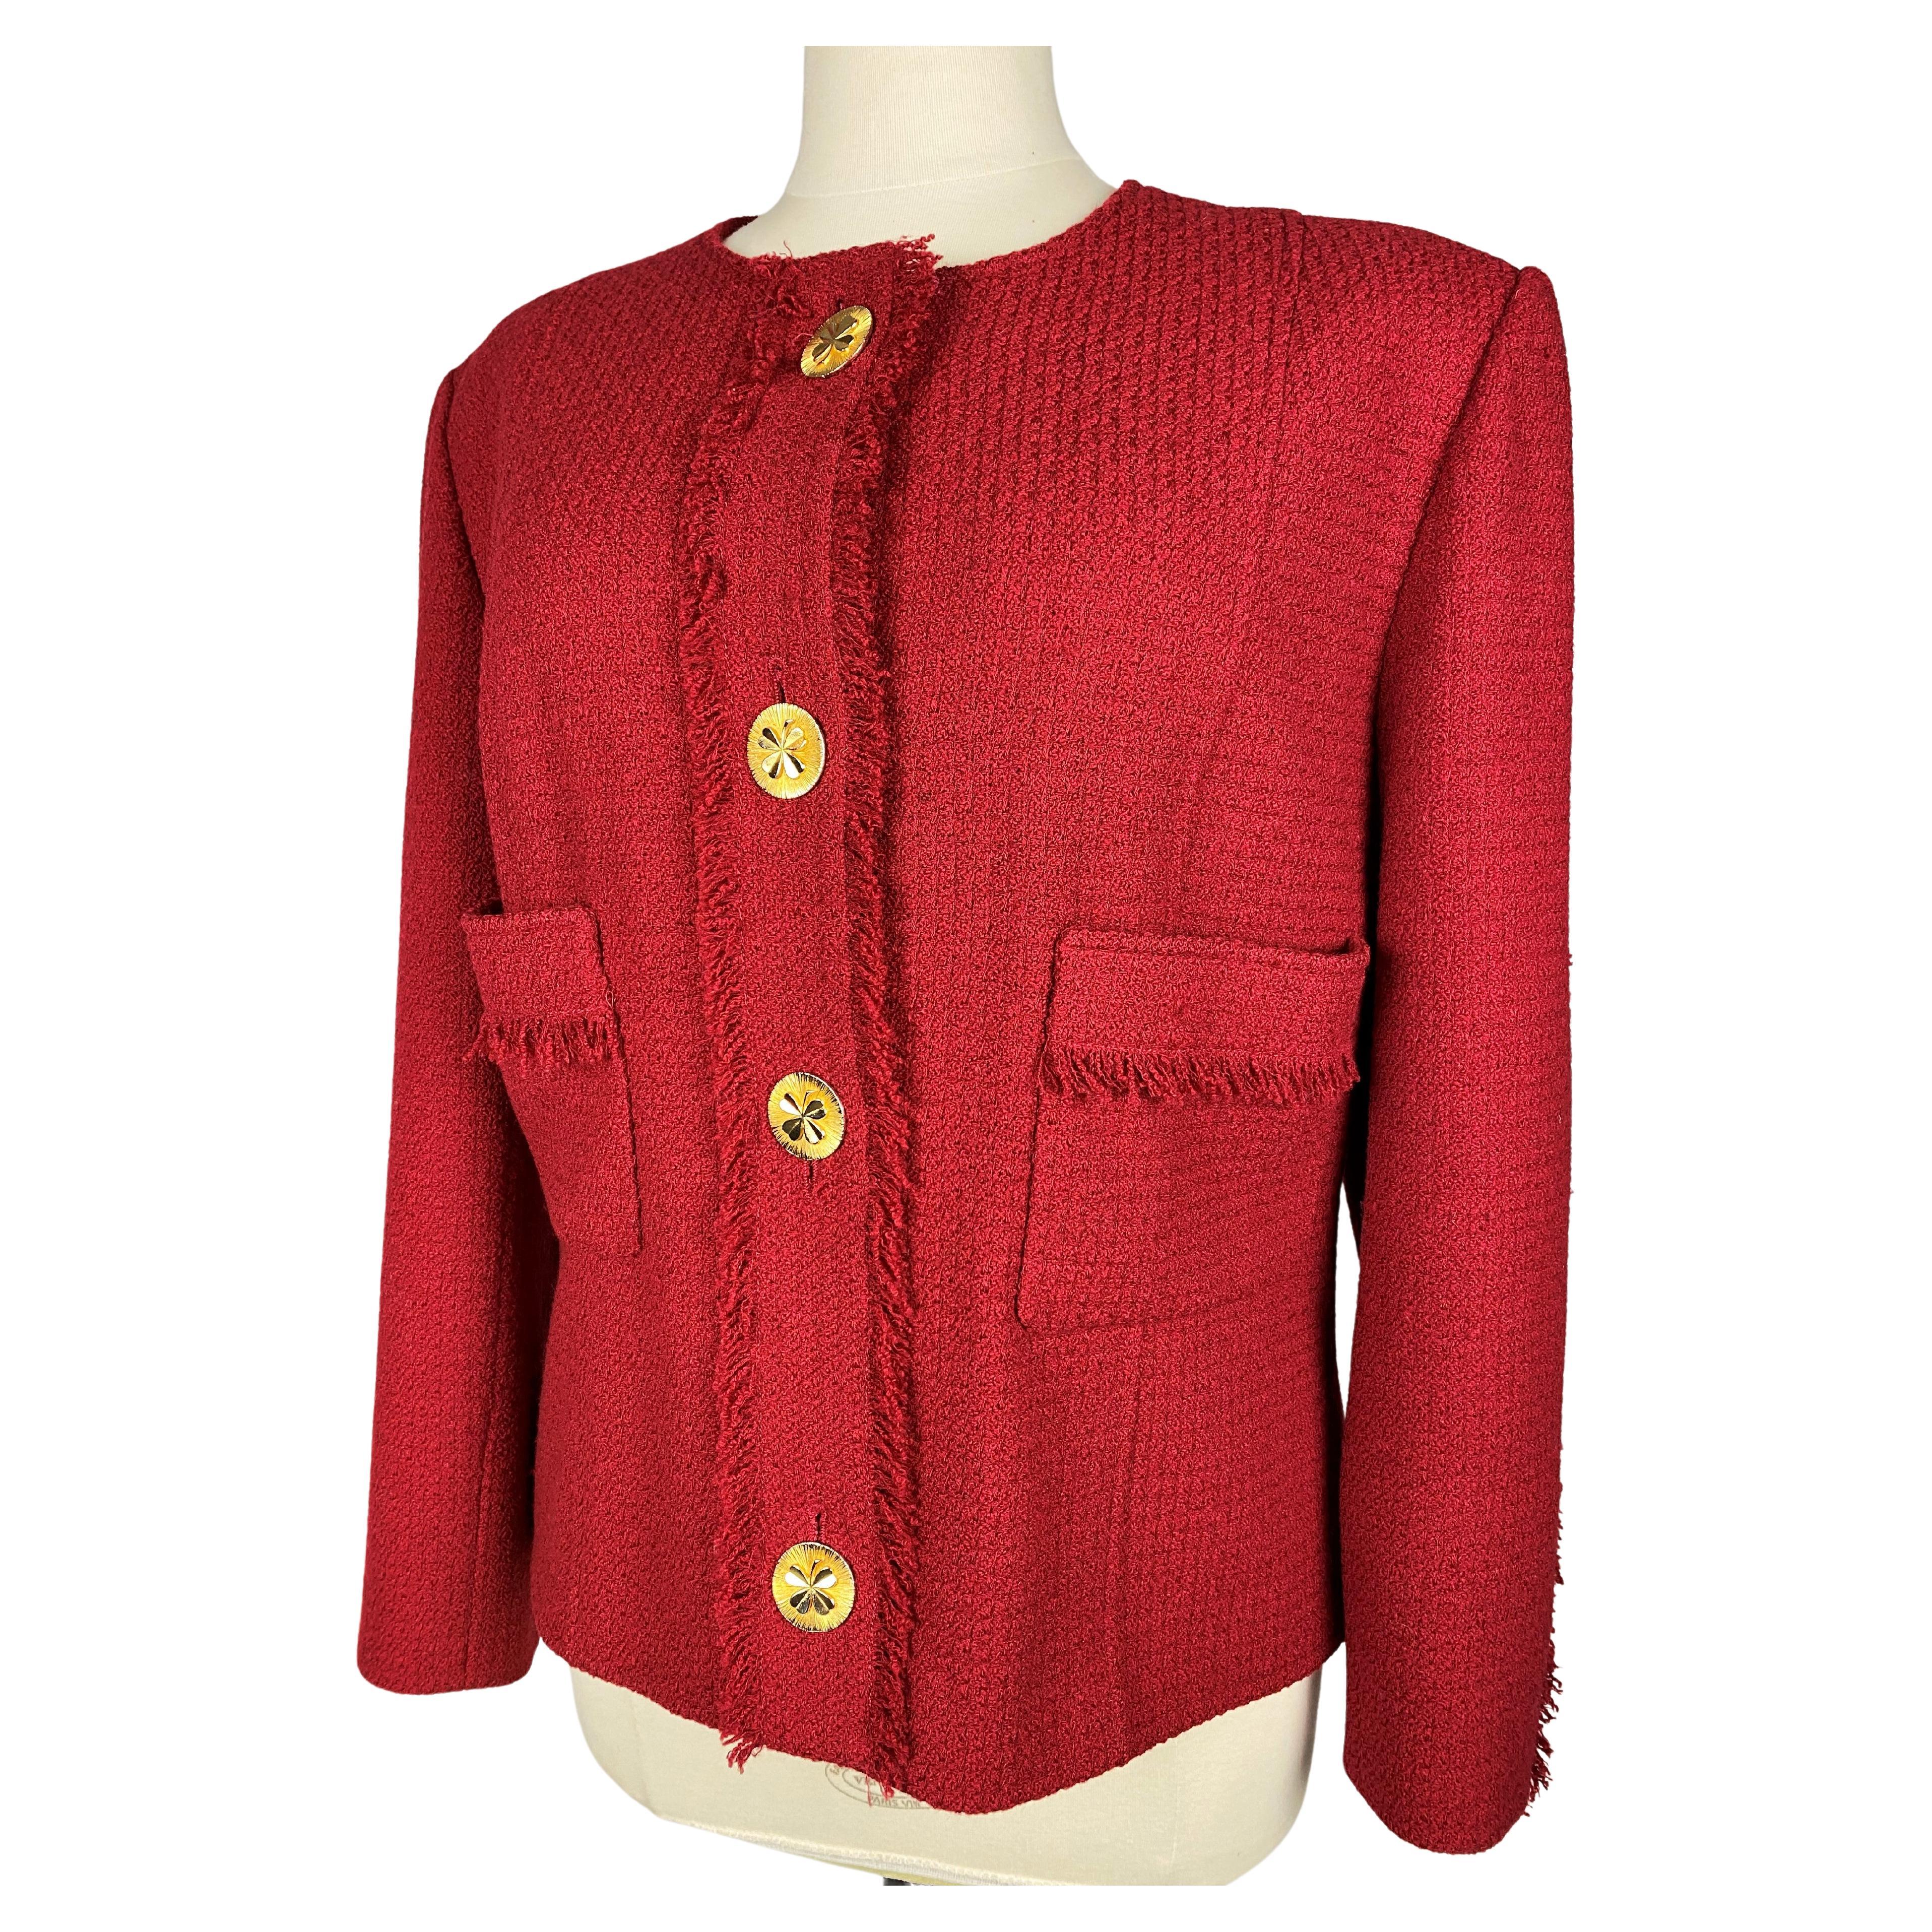 A Chanel - Karl Lagerfeld Red Mohair Wool Jacket Circa 1995-2000